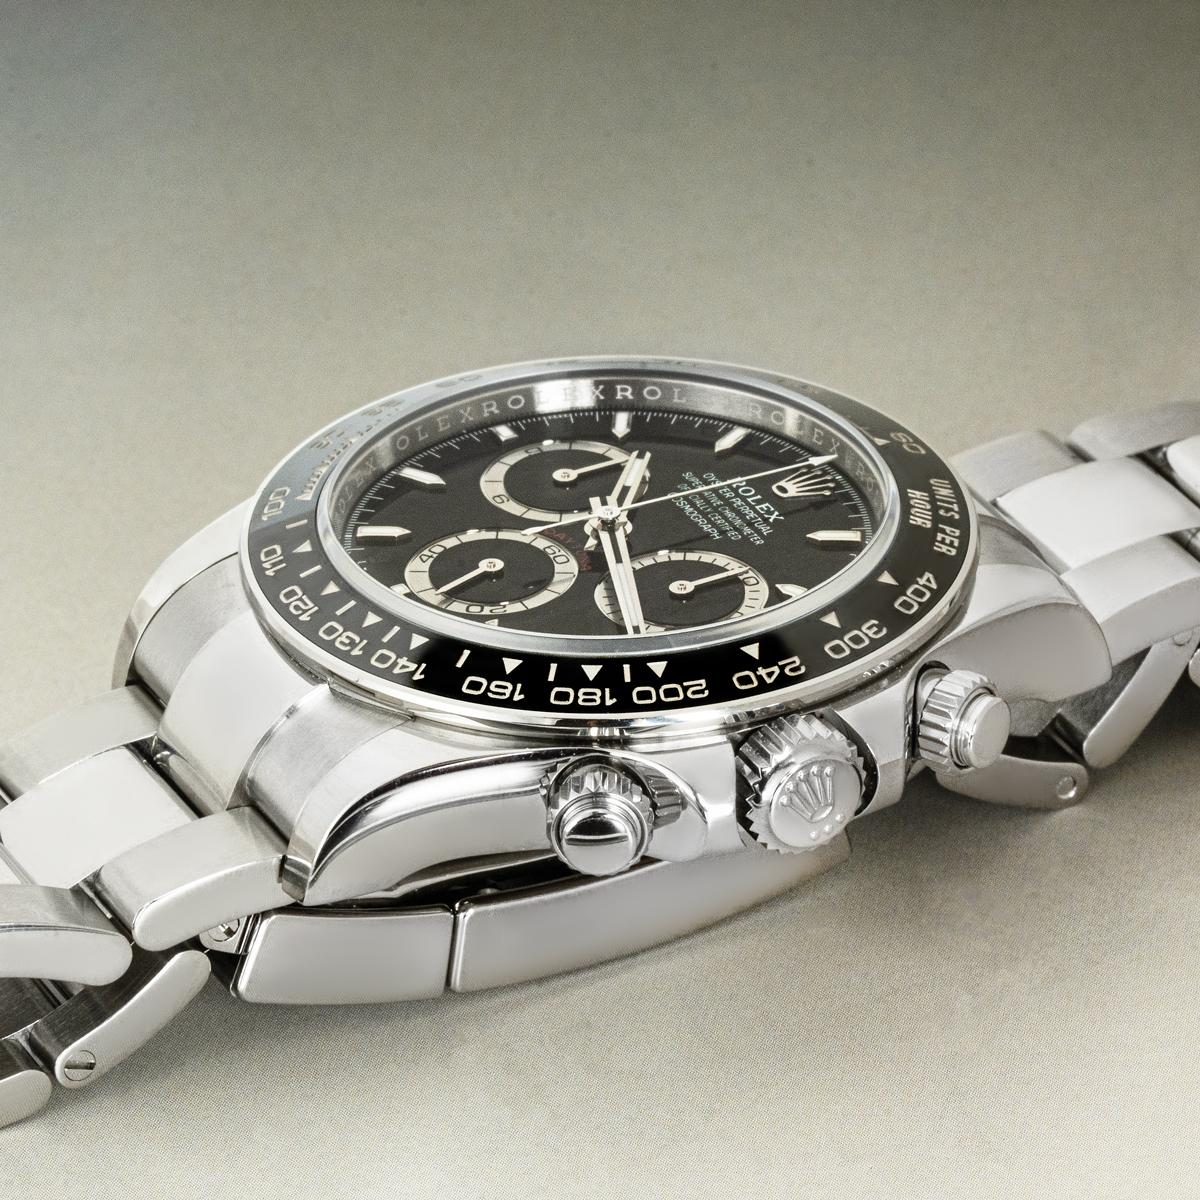 The latest Oystersteel Daytona release from Rolex. Featuring a highly legible black dial and black ceramic bezel, with features including three chronograph counters and a tachymetric scale.

Fitted with a sapphire crystal and a calibre 4131